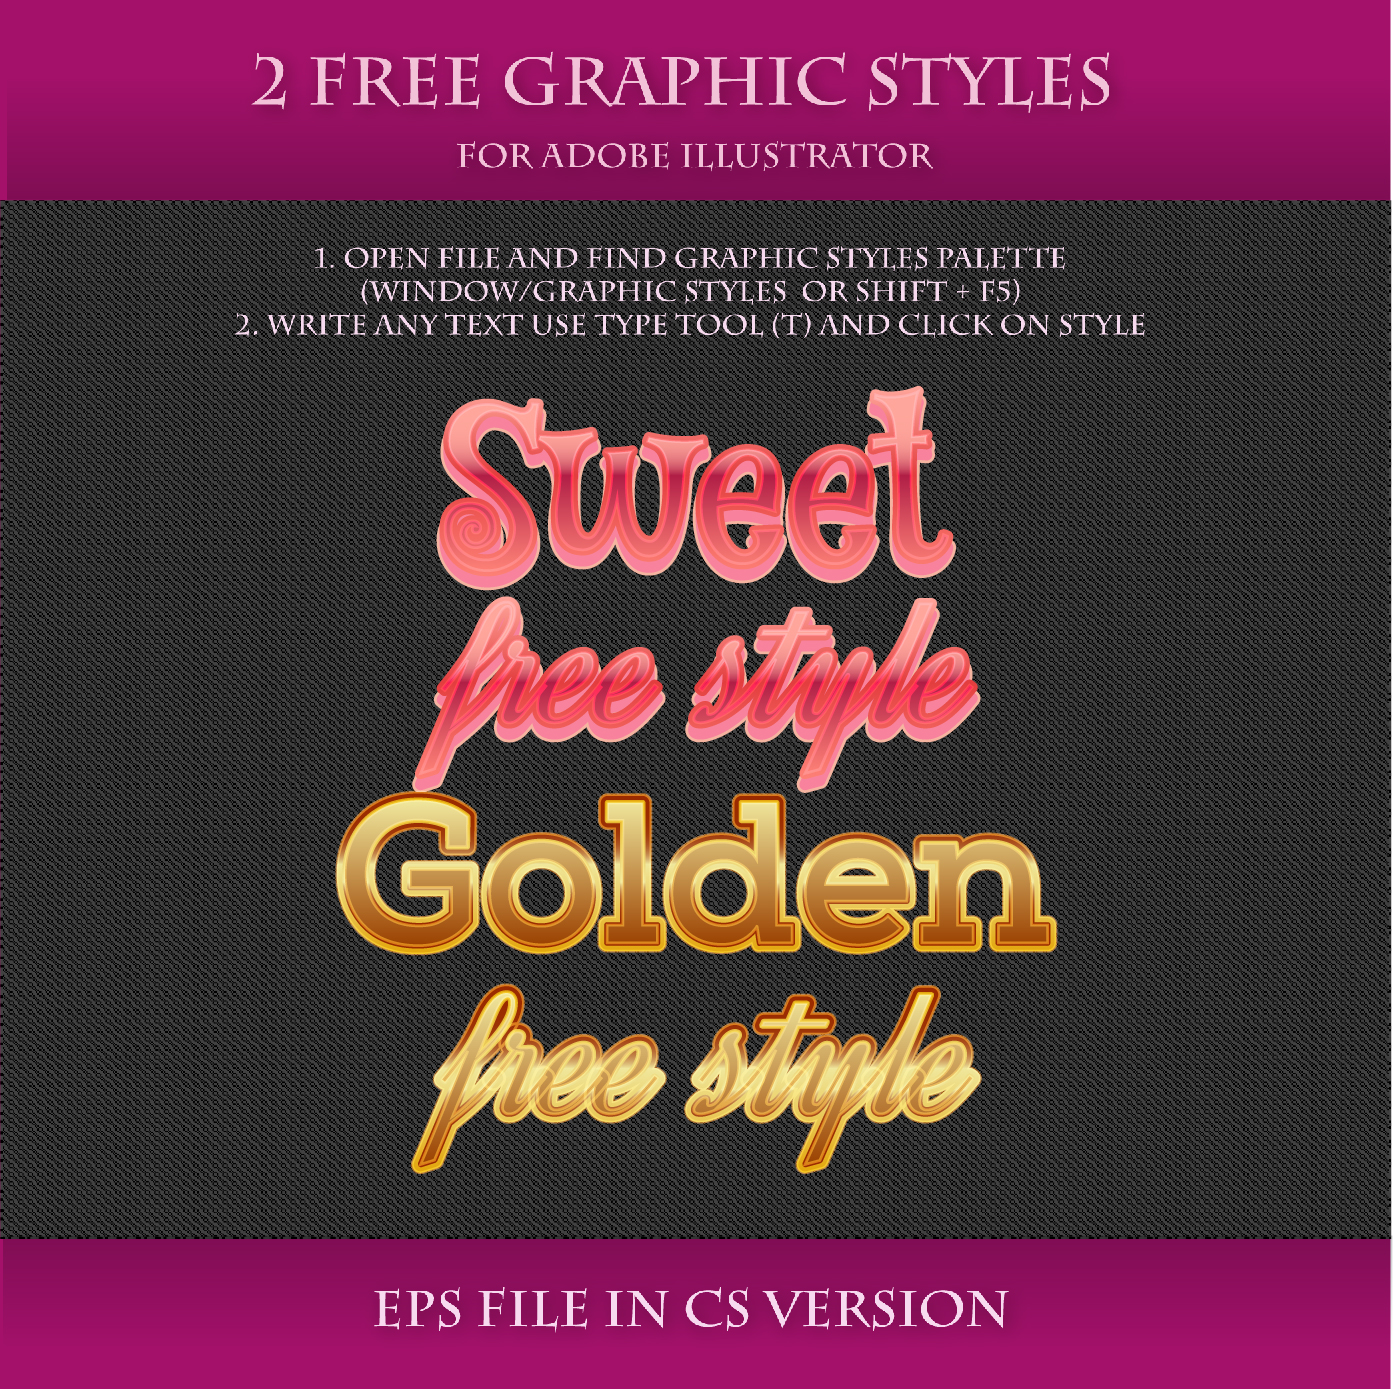 graphic styles for illustrator free download